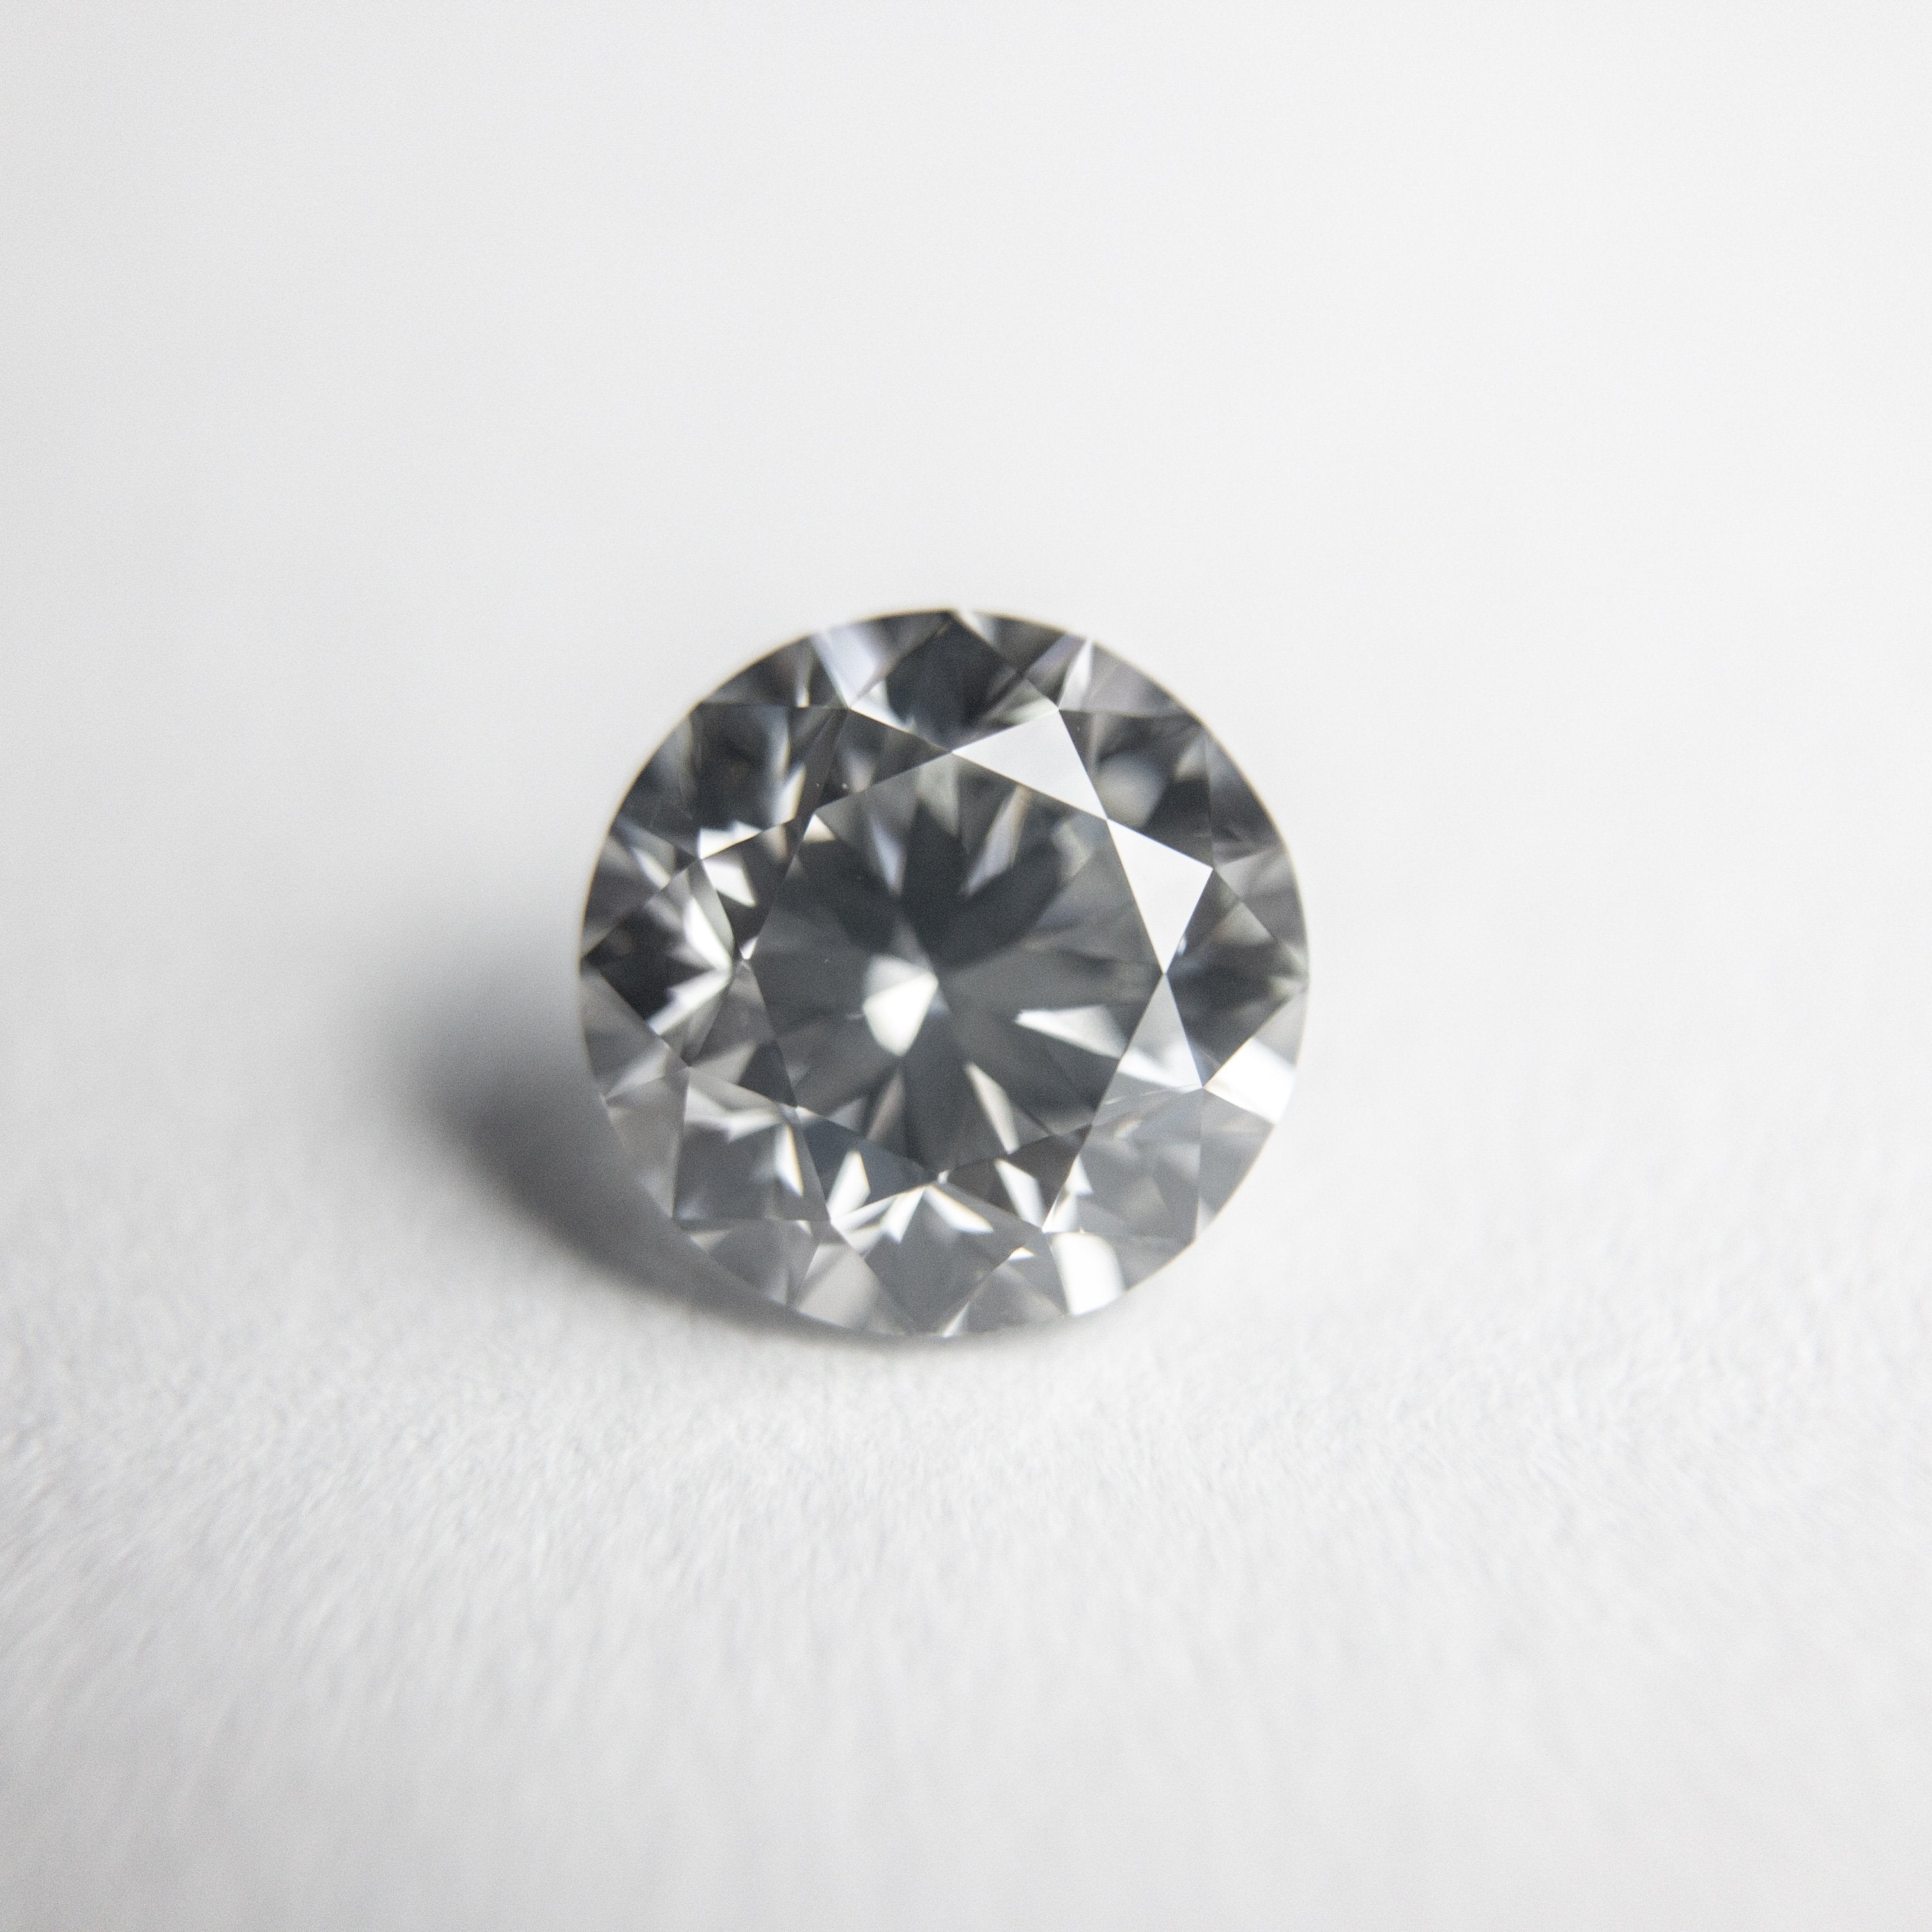 1.01ct 6.23x6.29x4.00mm GIA SI1 Silver Round Brilliant 18323-01 hold D1825